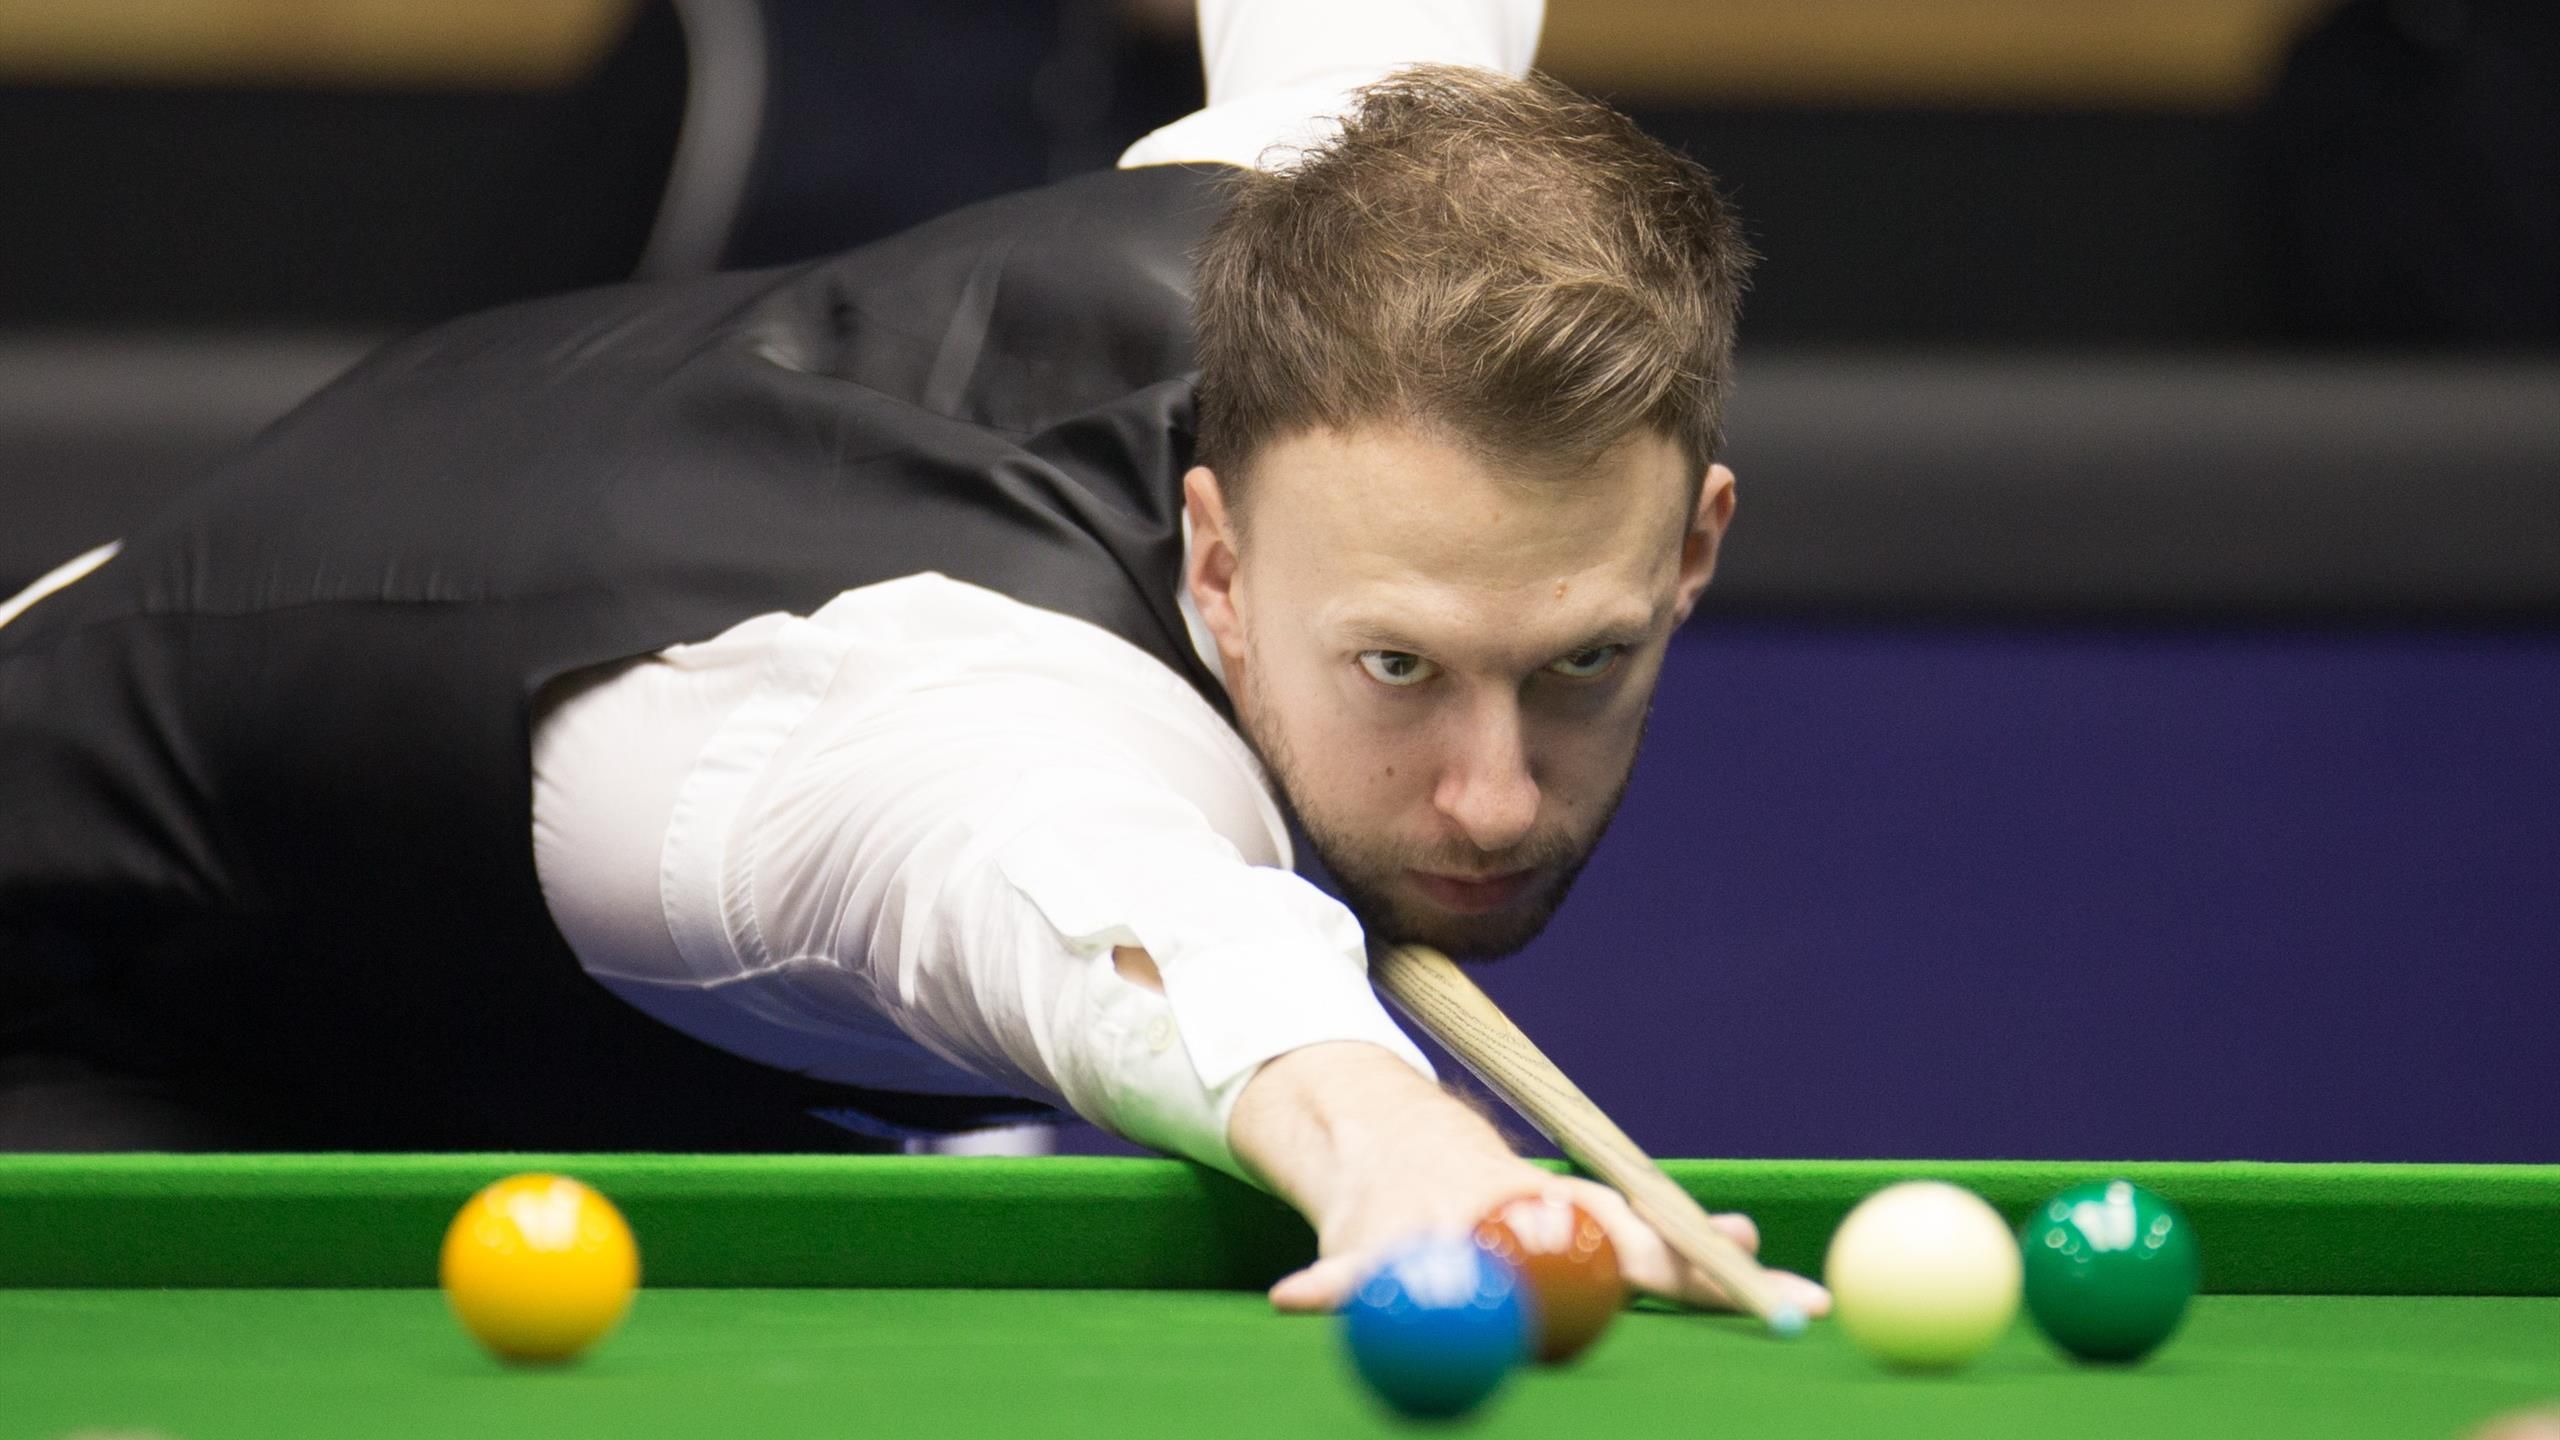 Snooker news - Judd Trump claims World Open victory over Thepchaiya Un-Nooh 